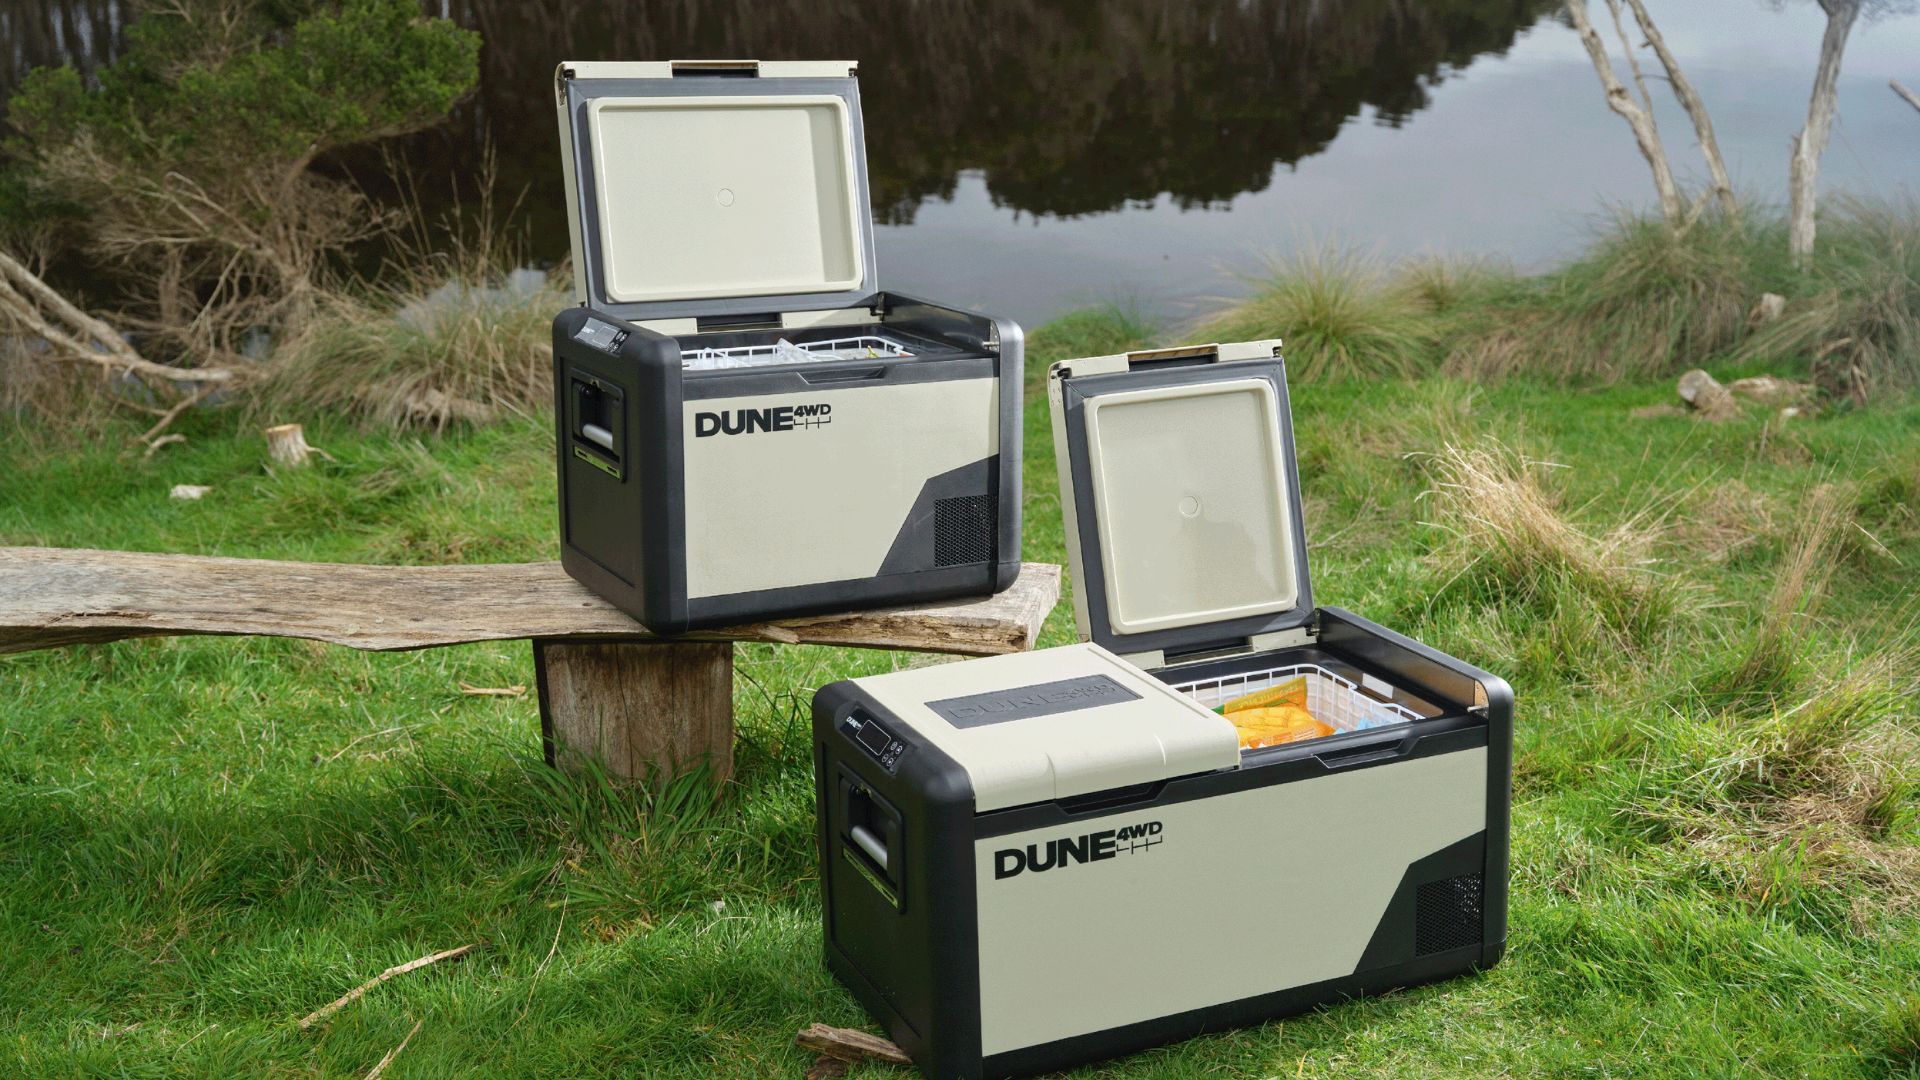 Dune 4WD offers a fridge/freezer solution for any kind of adventurer